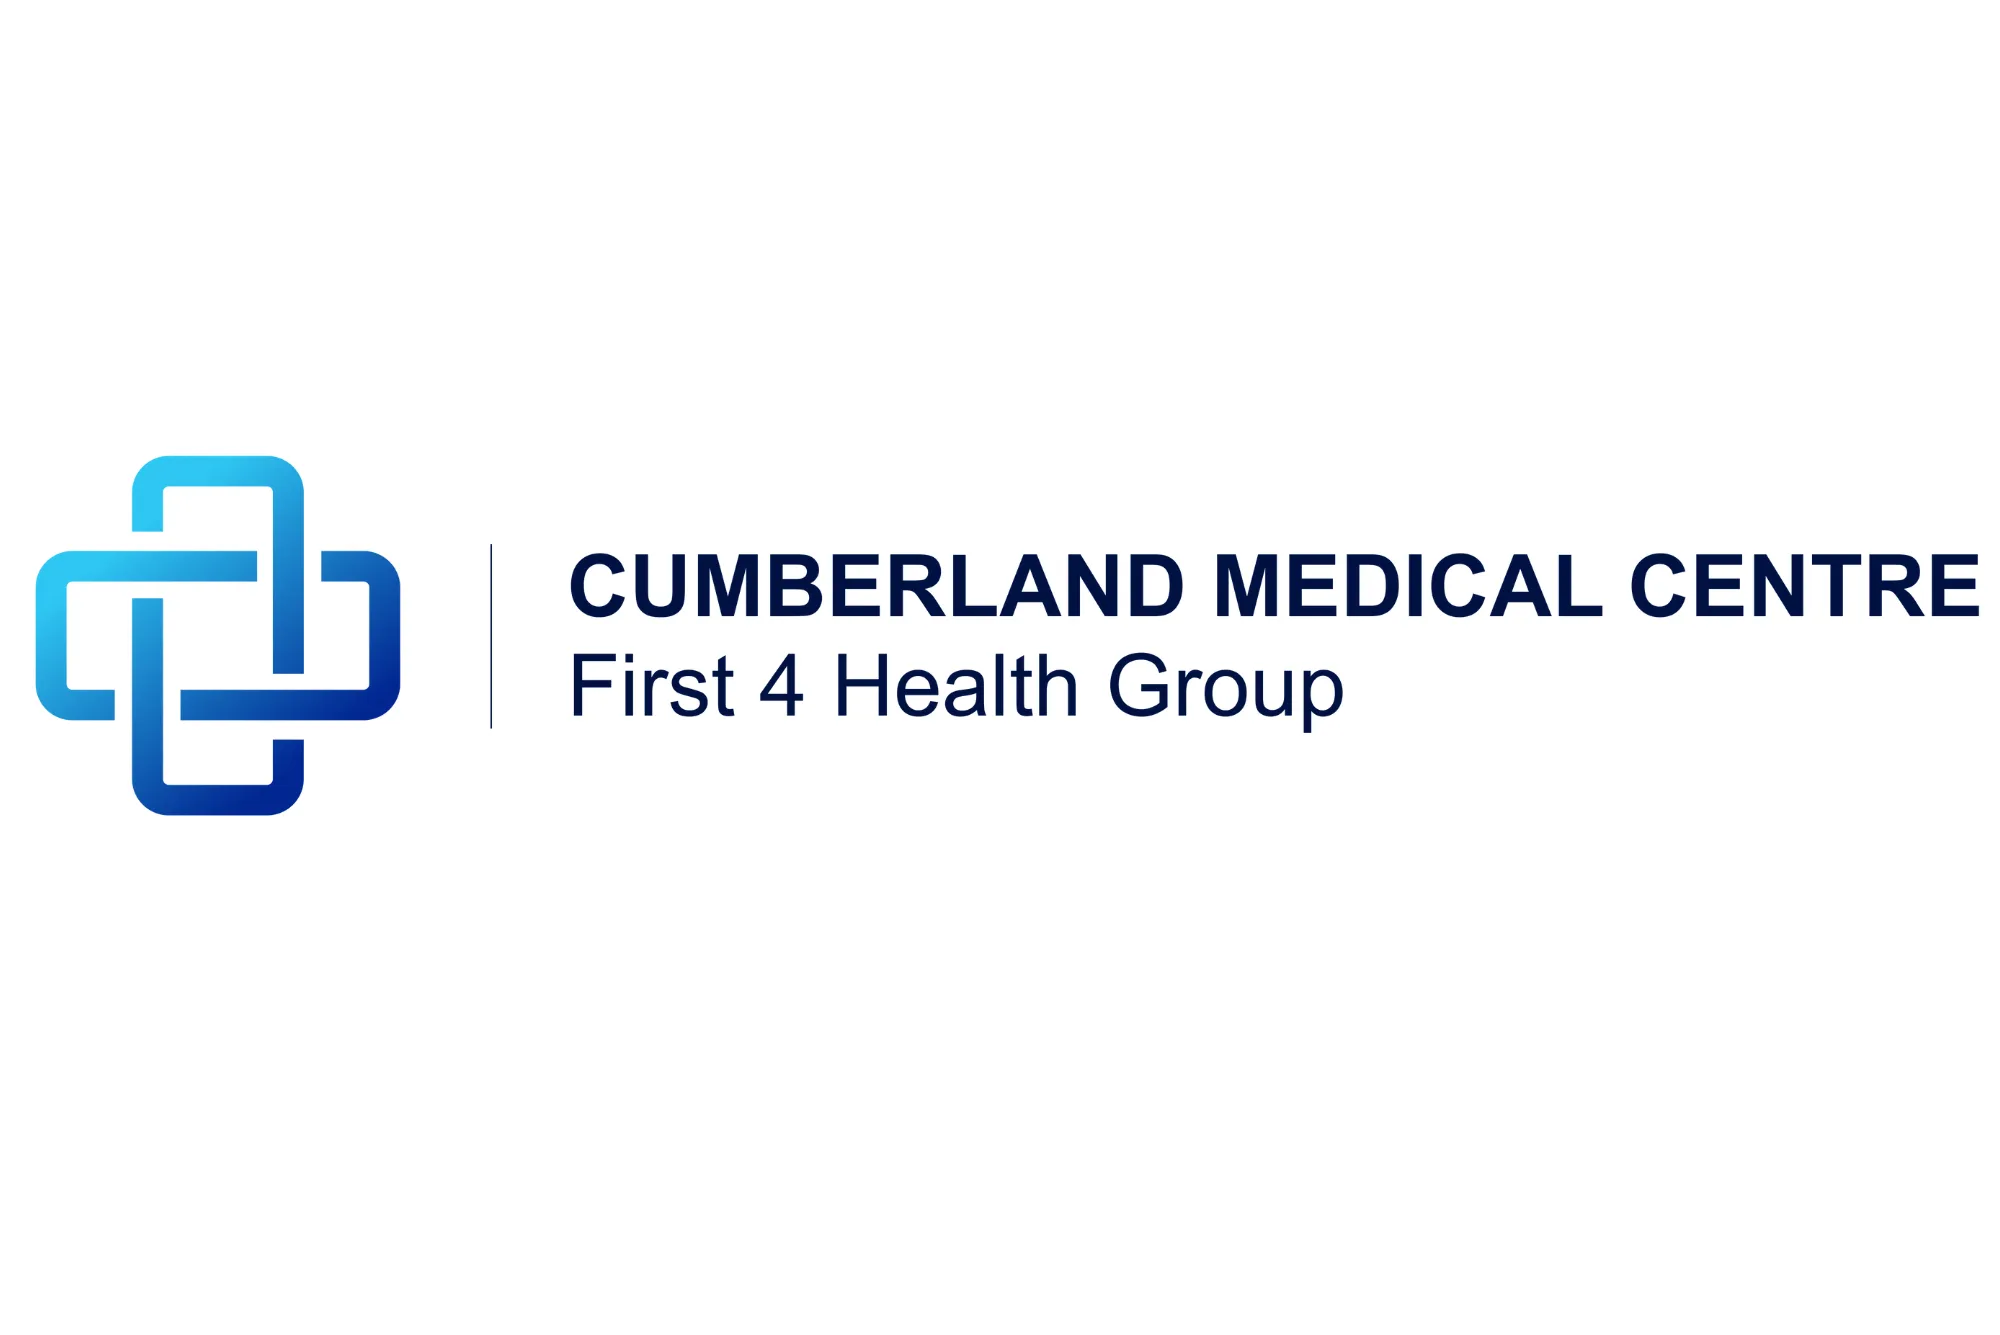 First 4 Health Group Cumberland Medical Centre